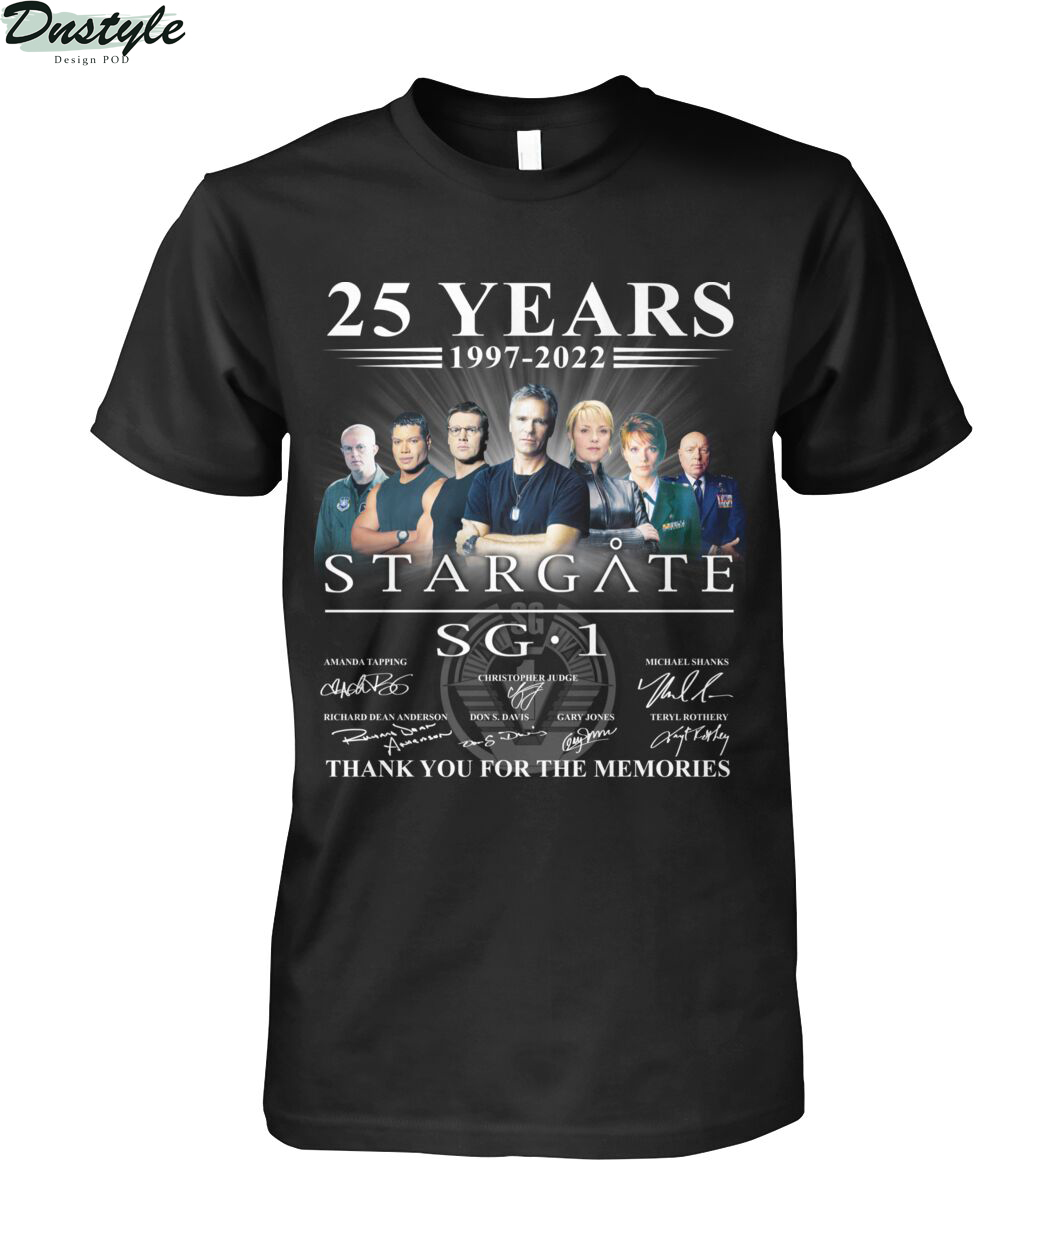 Stargate SG-1 25 years 1977-2021 thank you for the memories shirt